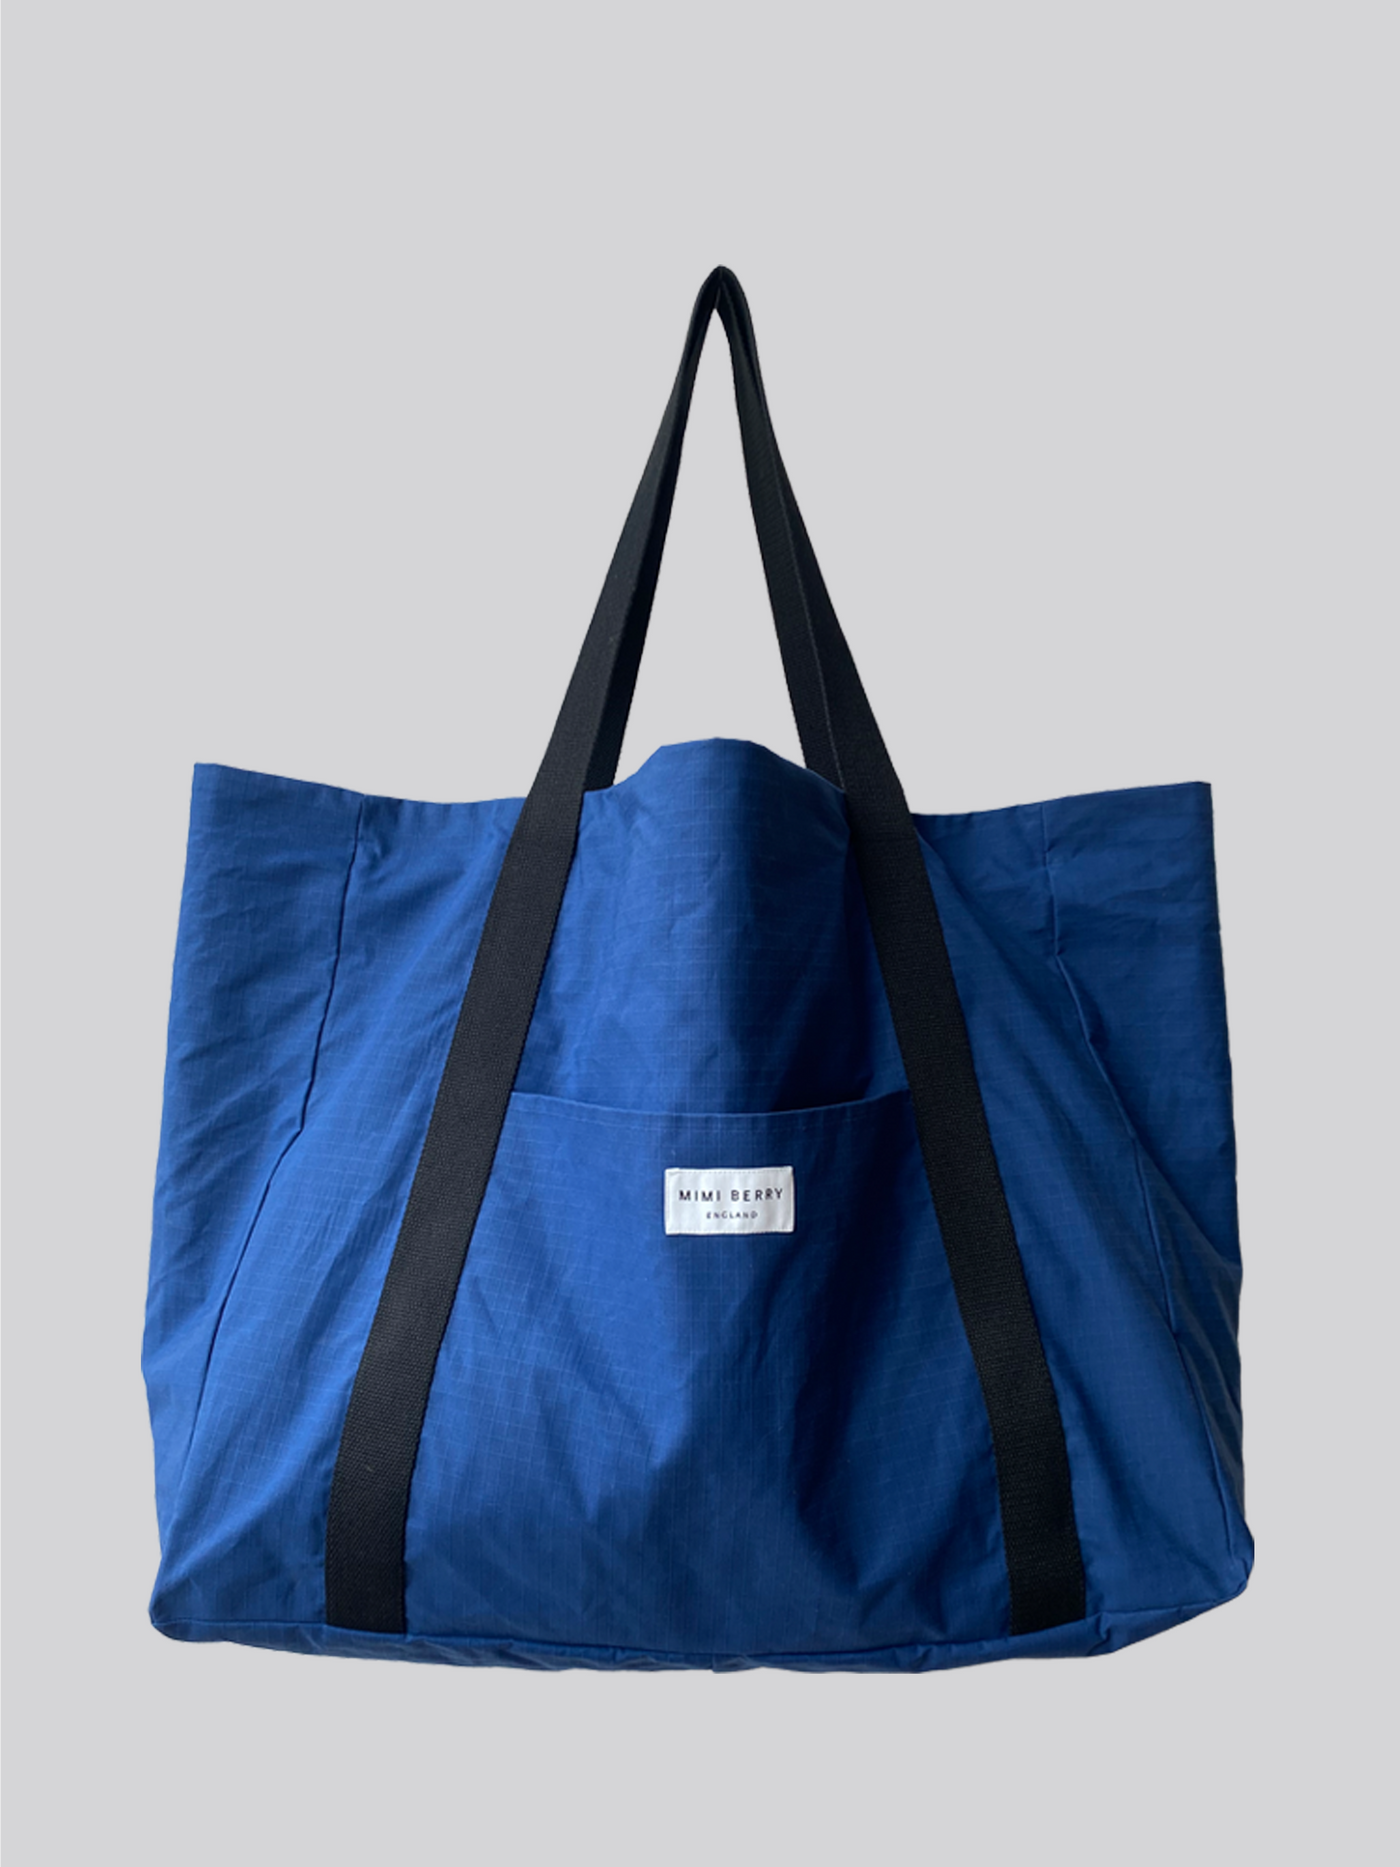 Giant Tote - Blue}